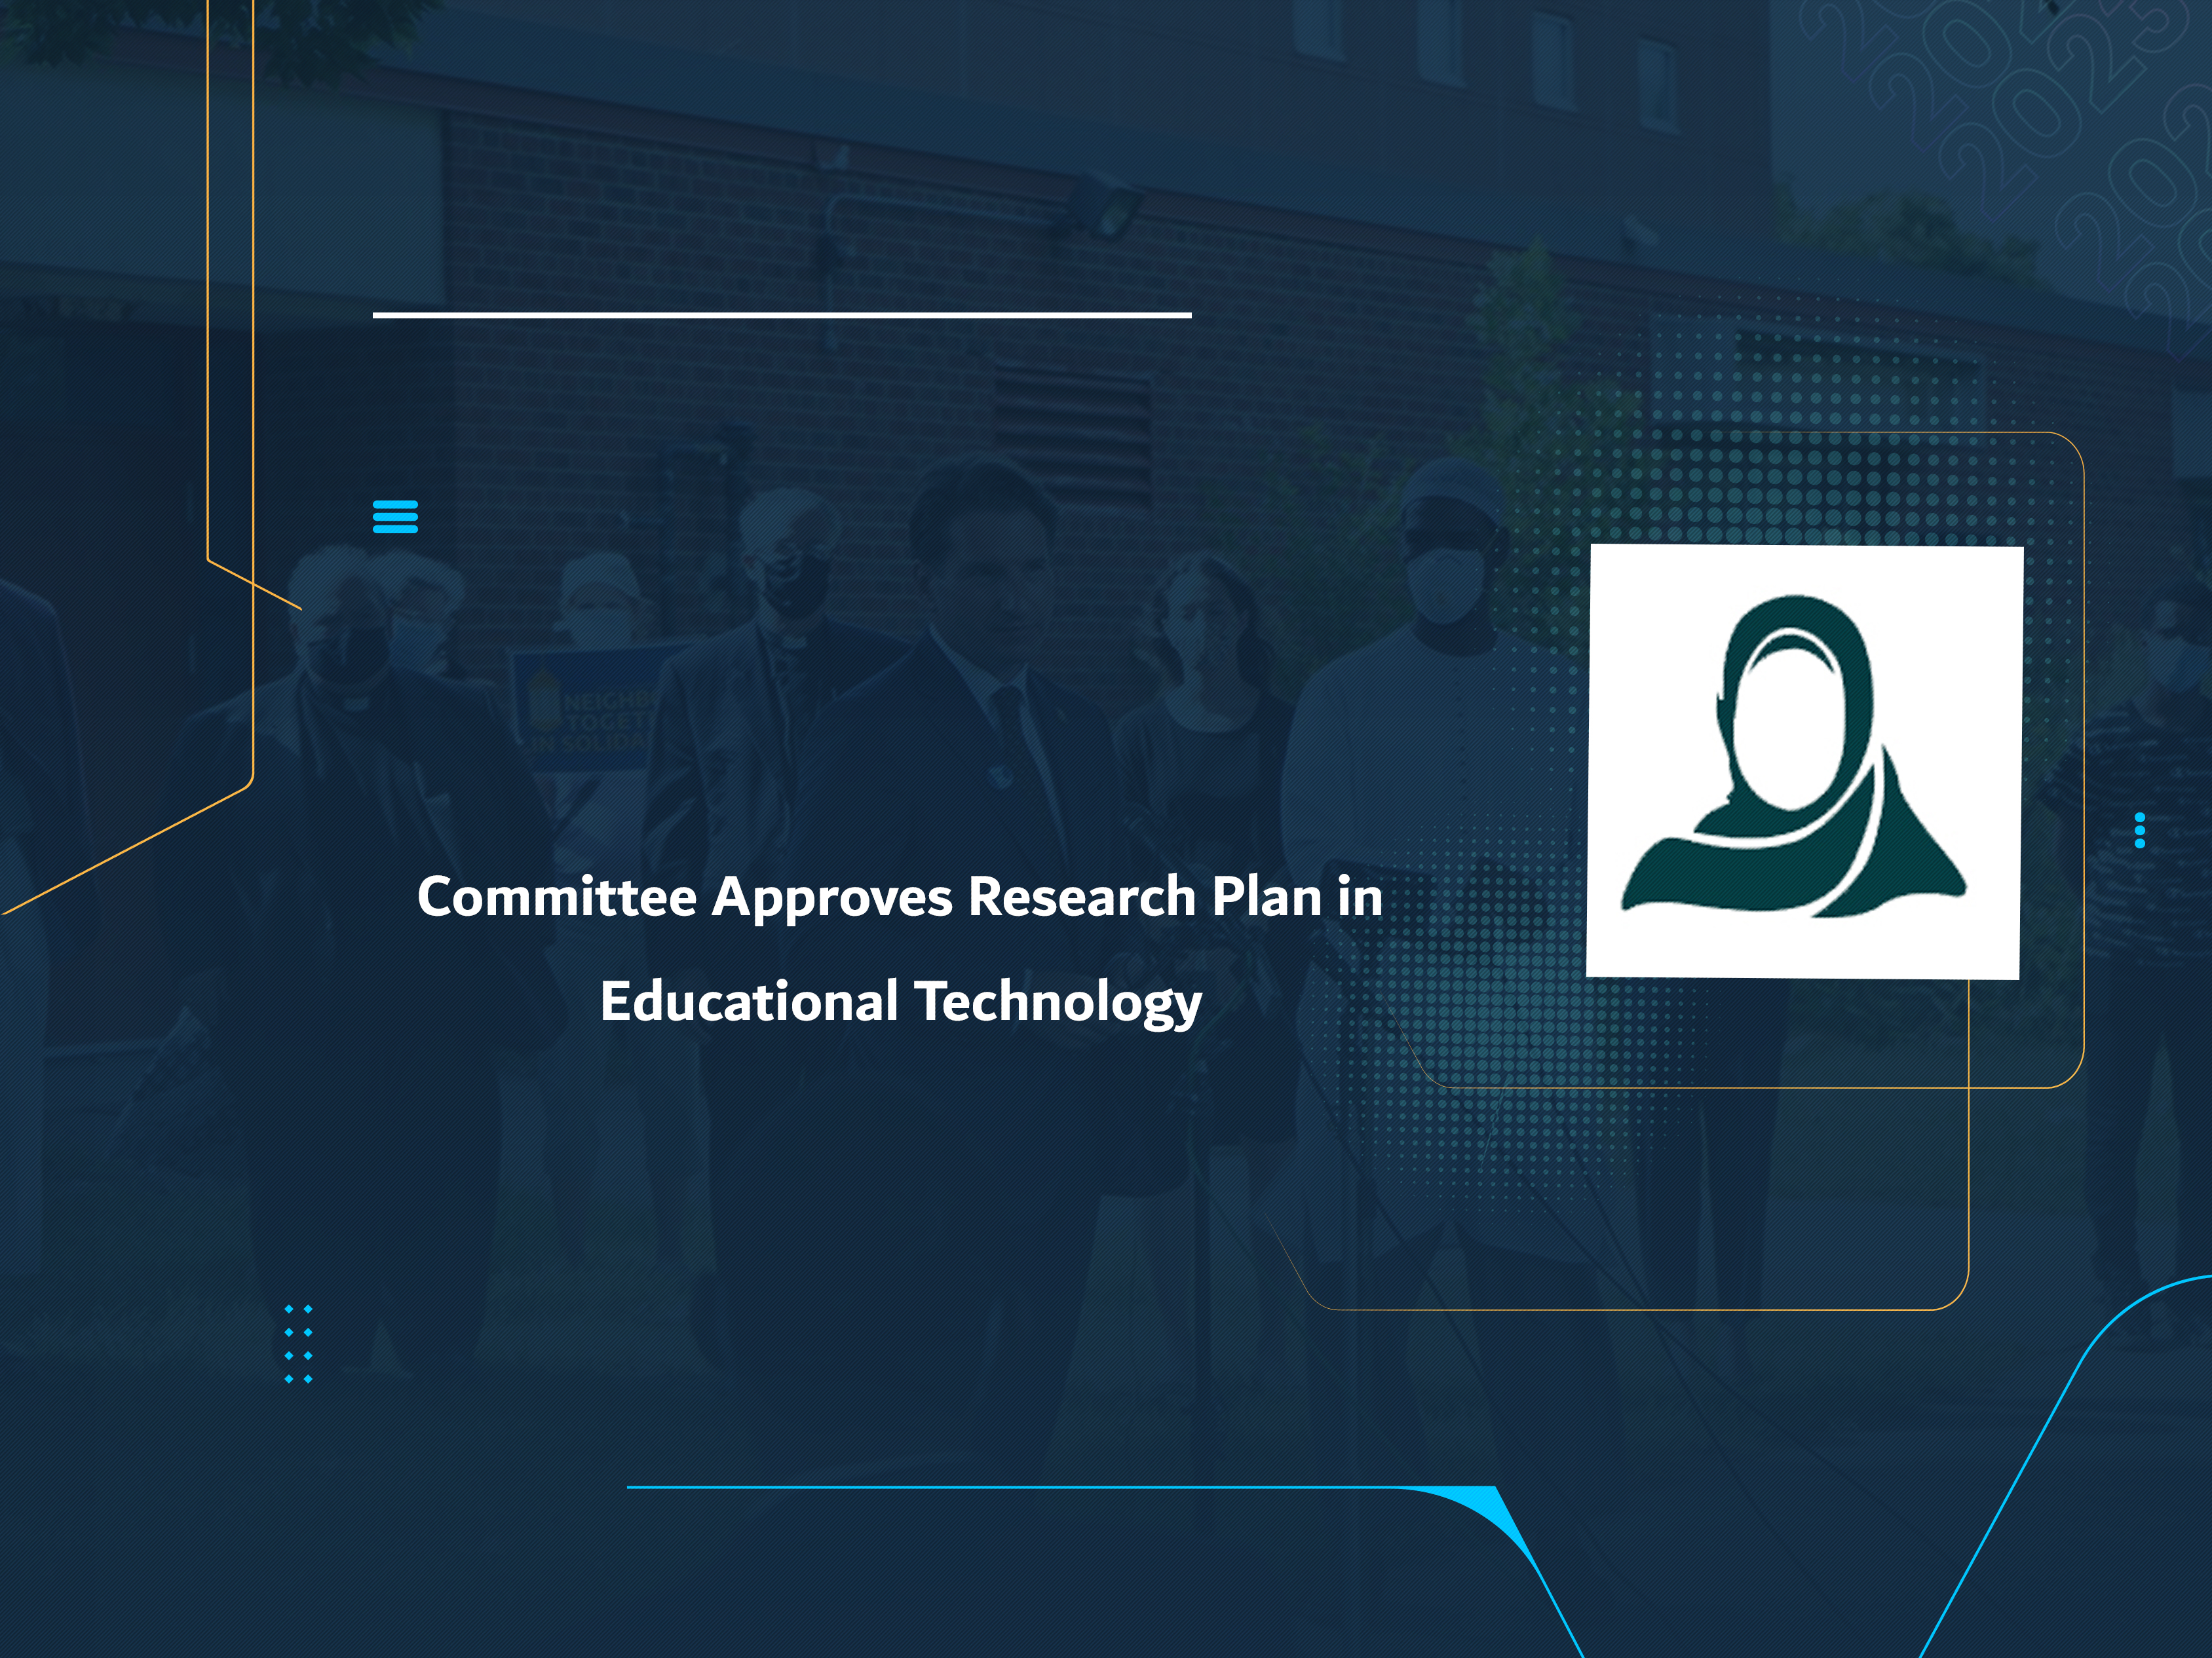 Committee Approves Research Plan in Educational Technology